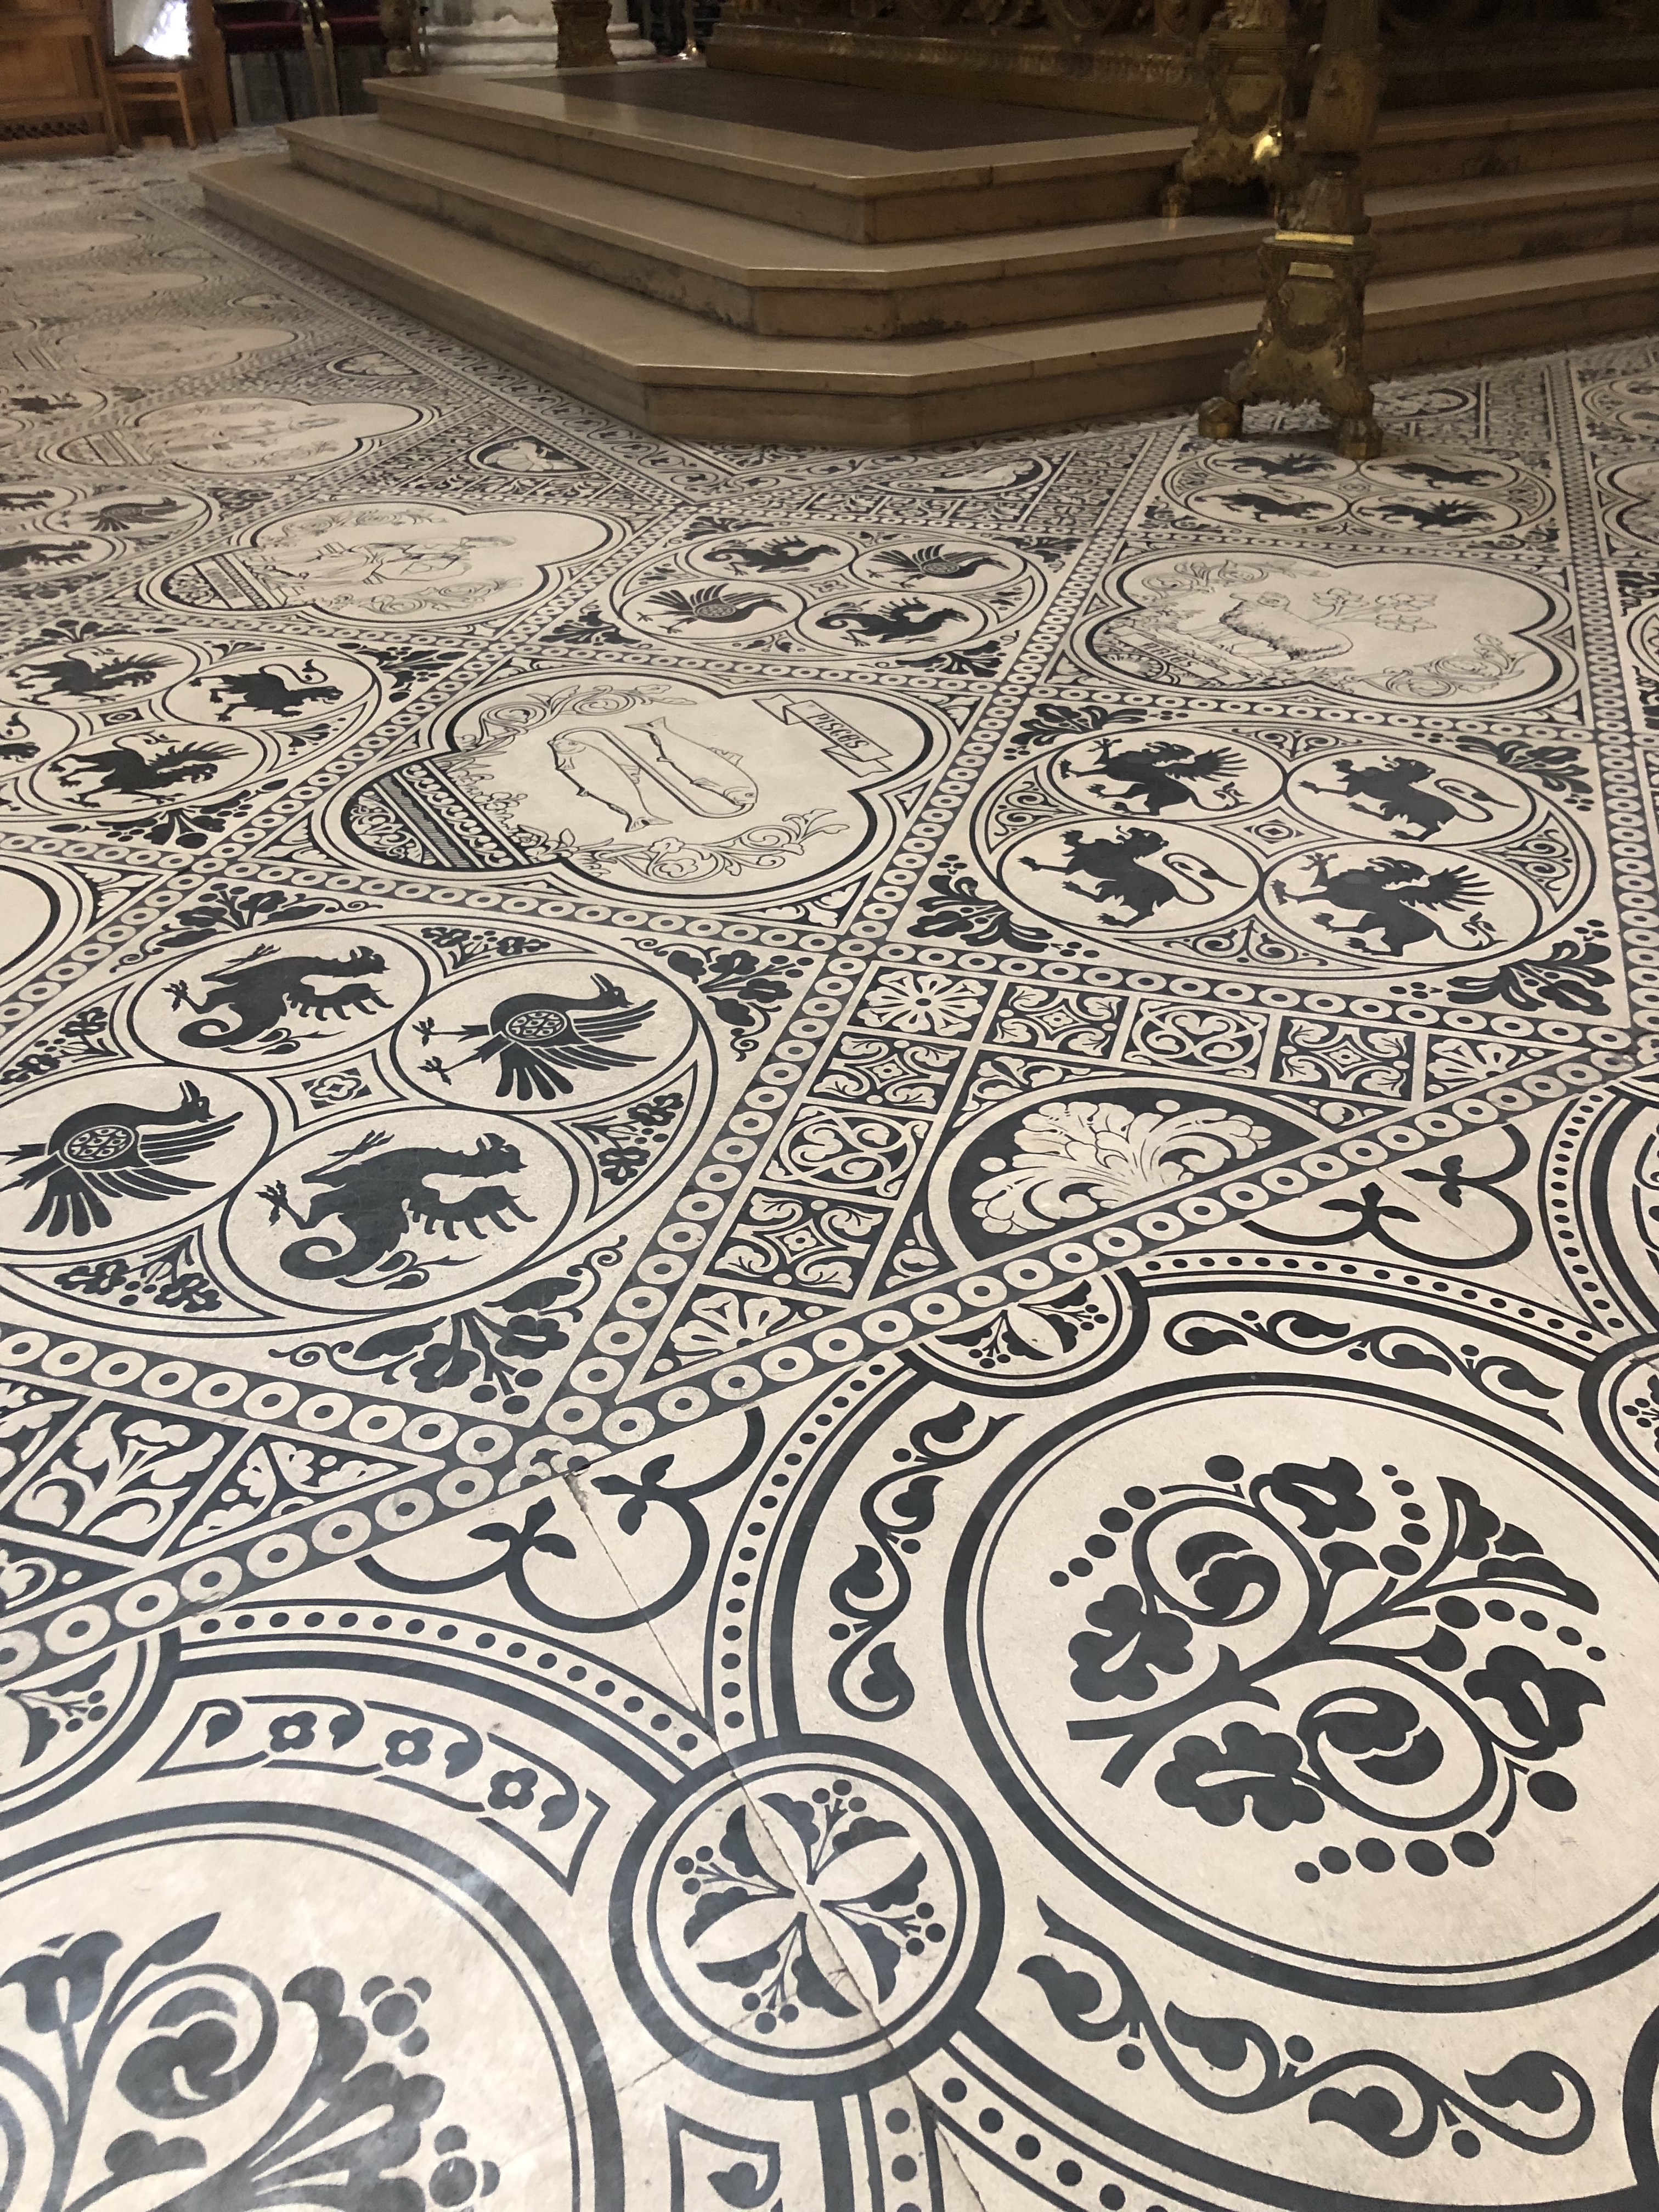 Floor of a church in Brussels with blue painted symbols